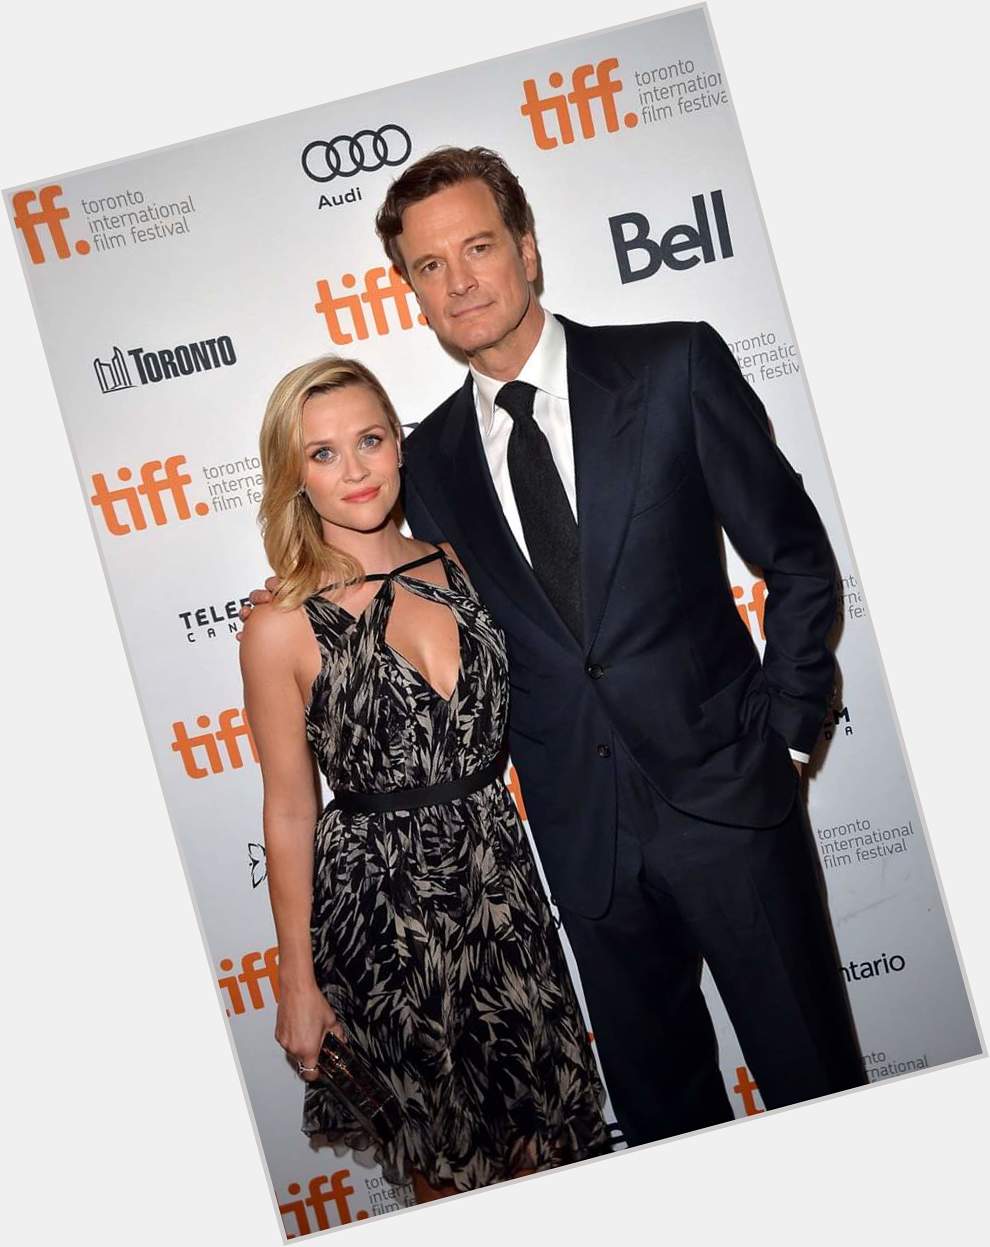  COLIN FIRTH ADDICTED HAPPY BIRTHDAY, \"REESE WITHERSPOON\" ^^   